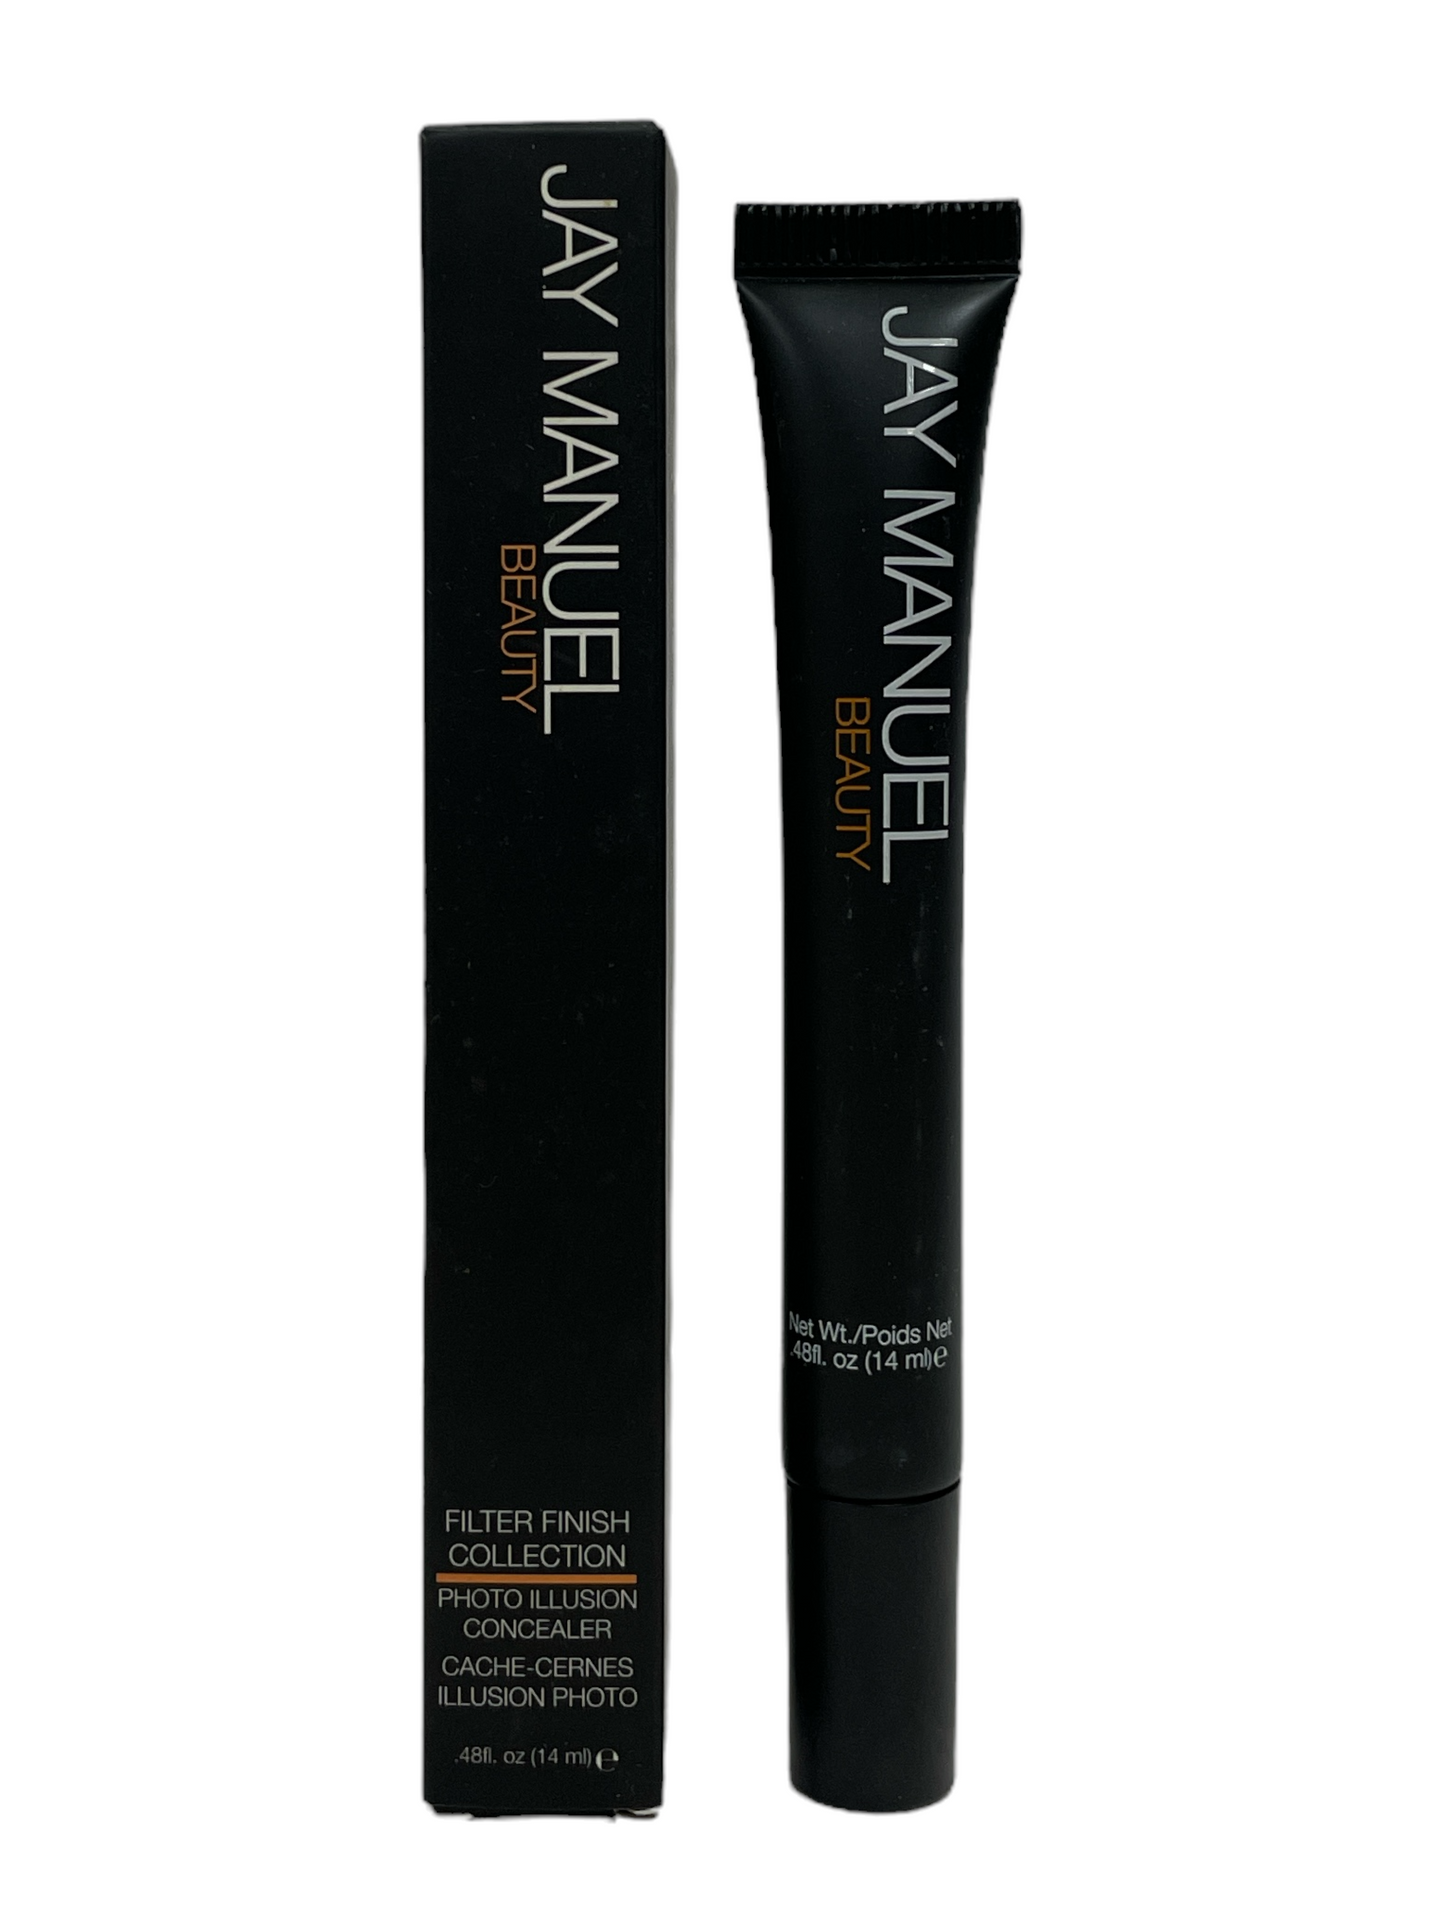 Jay Manuel Beauty Filter Finish Collection Photo Illusion Concealer